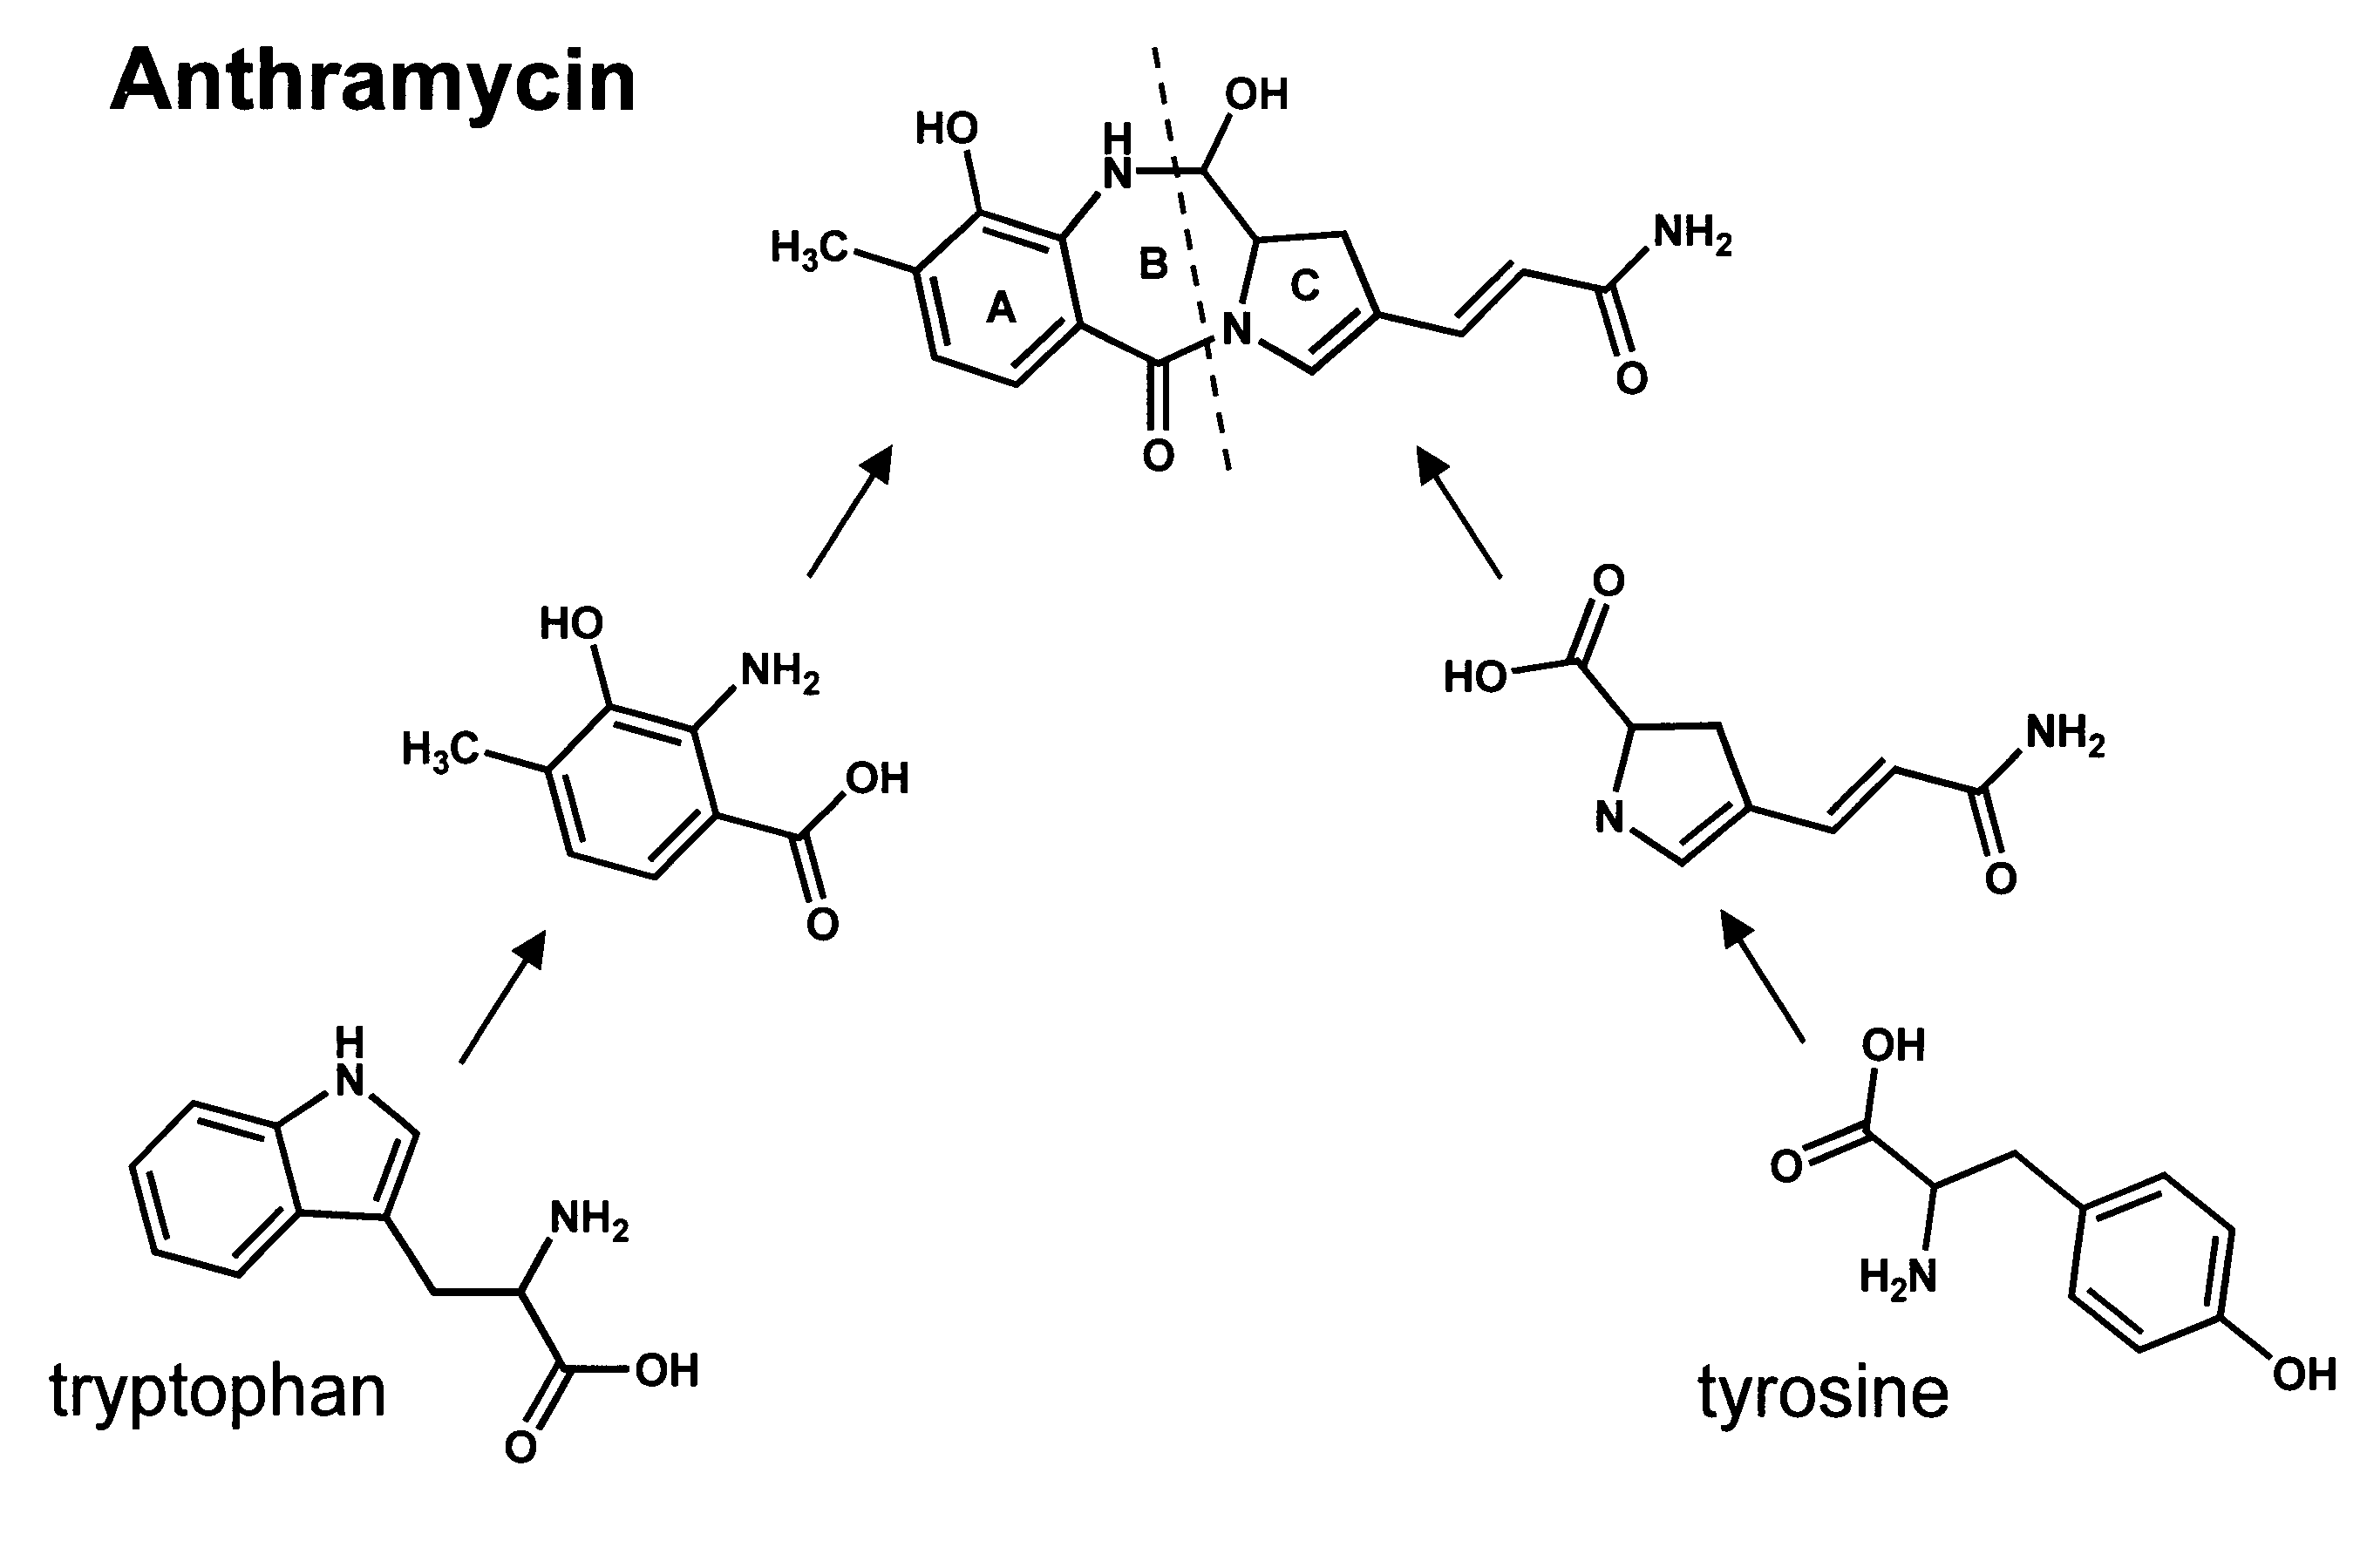 Nucleic acid fragment encoding an NRPS for the biosynthesis of anthramycin